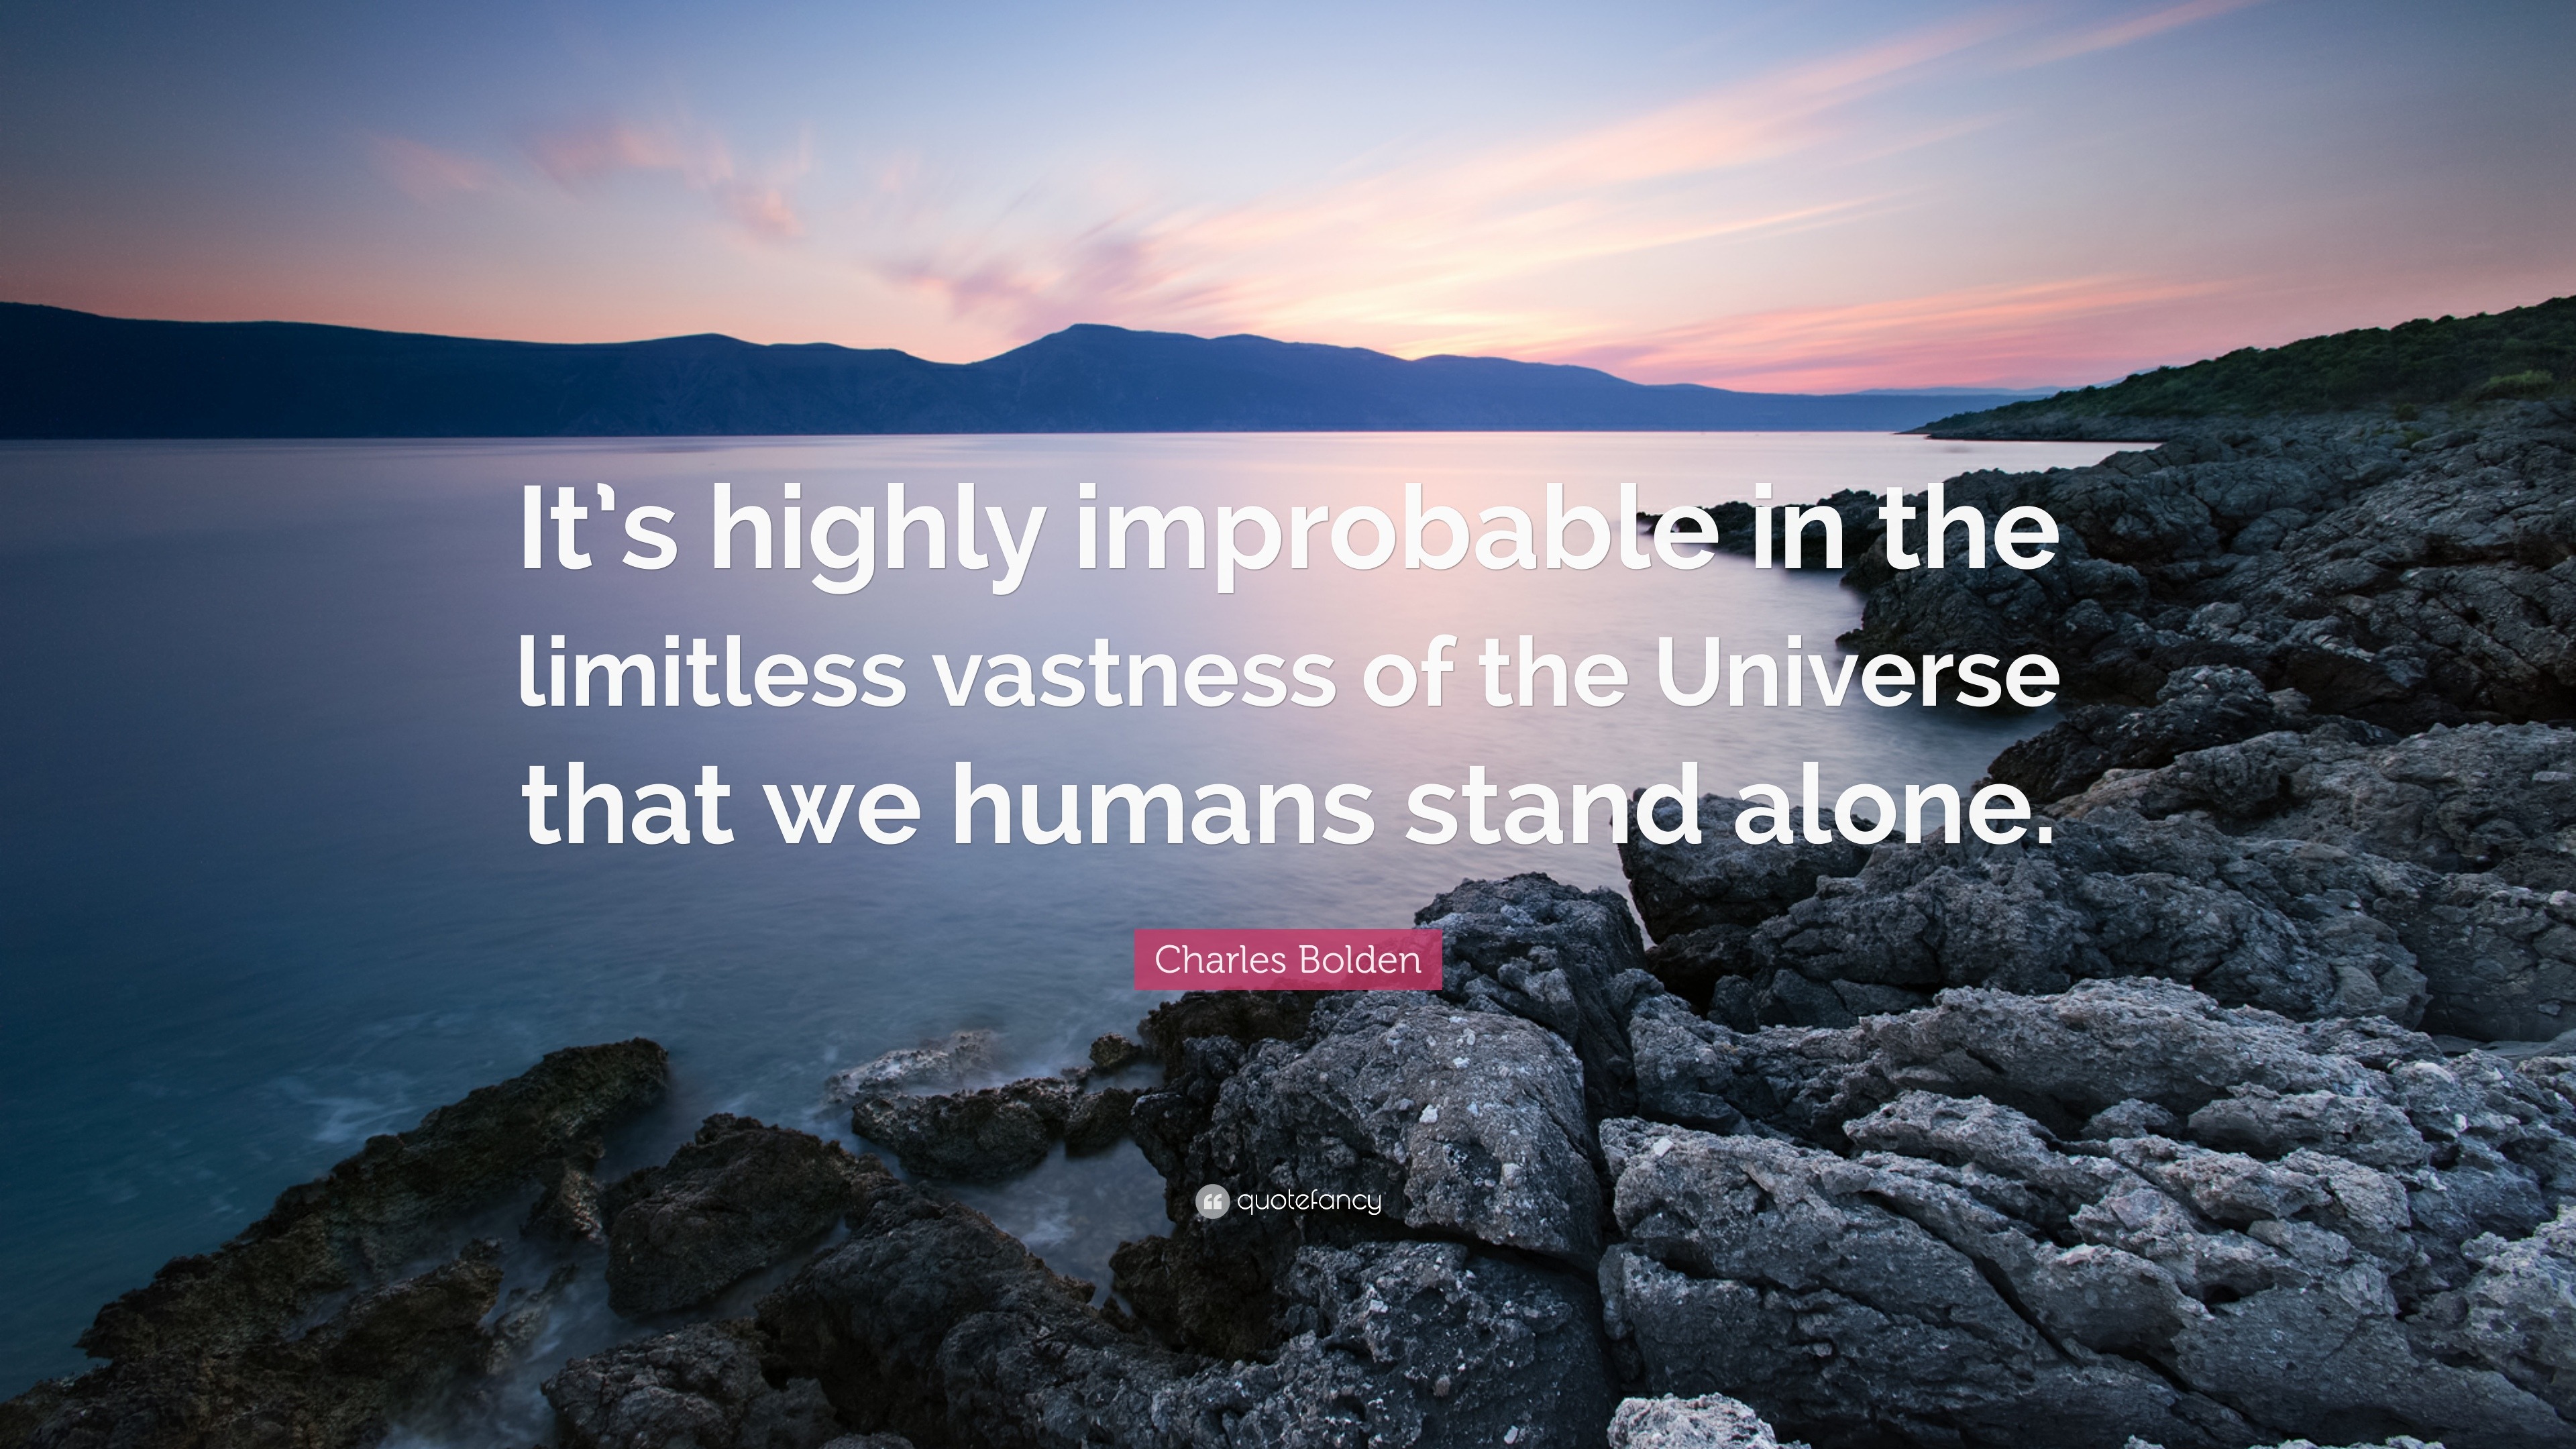 Charles Bolden Quote: “It's highly improbable in the limitless vastness of  the Universe that we humans